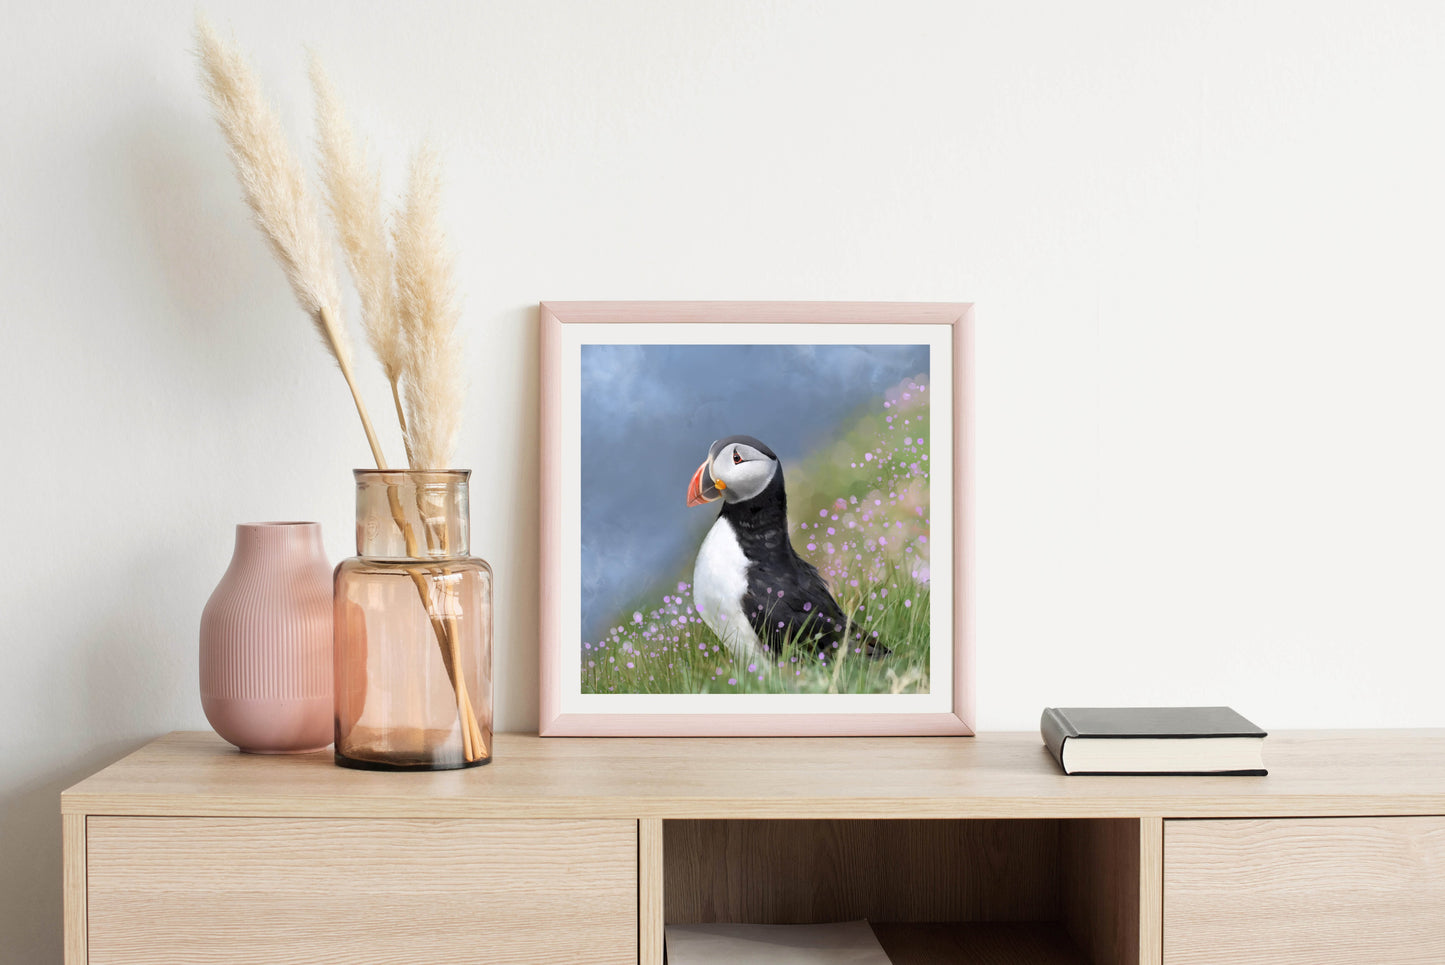 Puffin Misty Sea and Wildflowers - Illustrated Print by Thomas Little